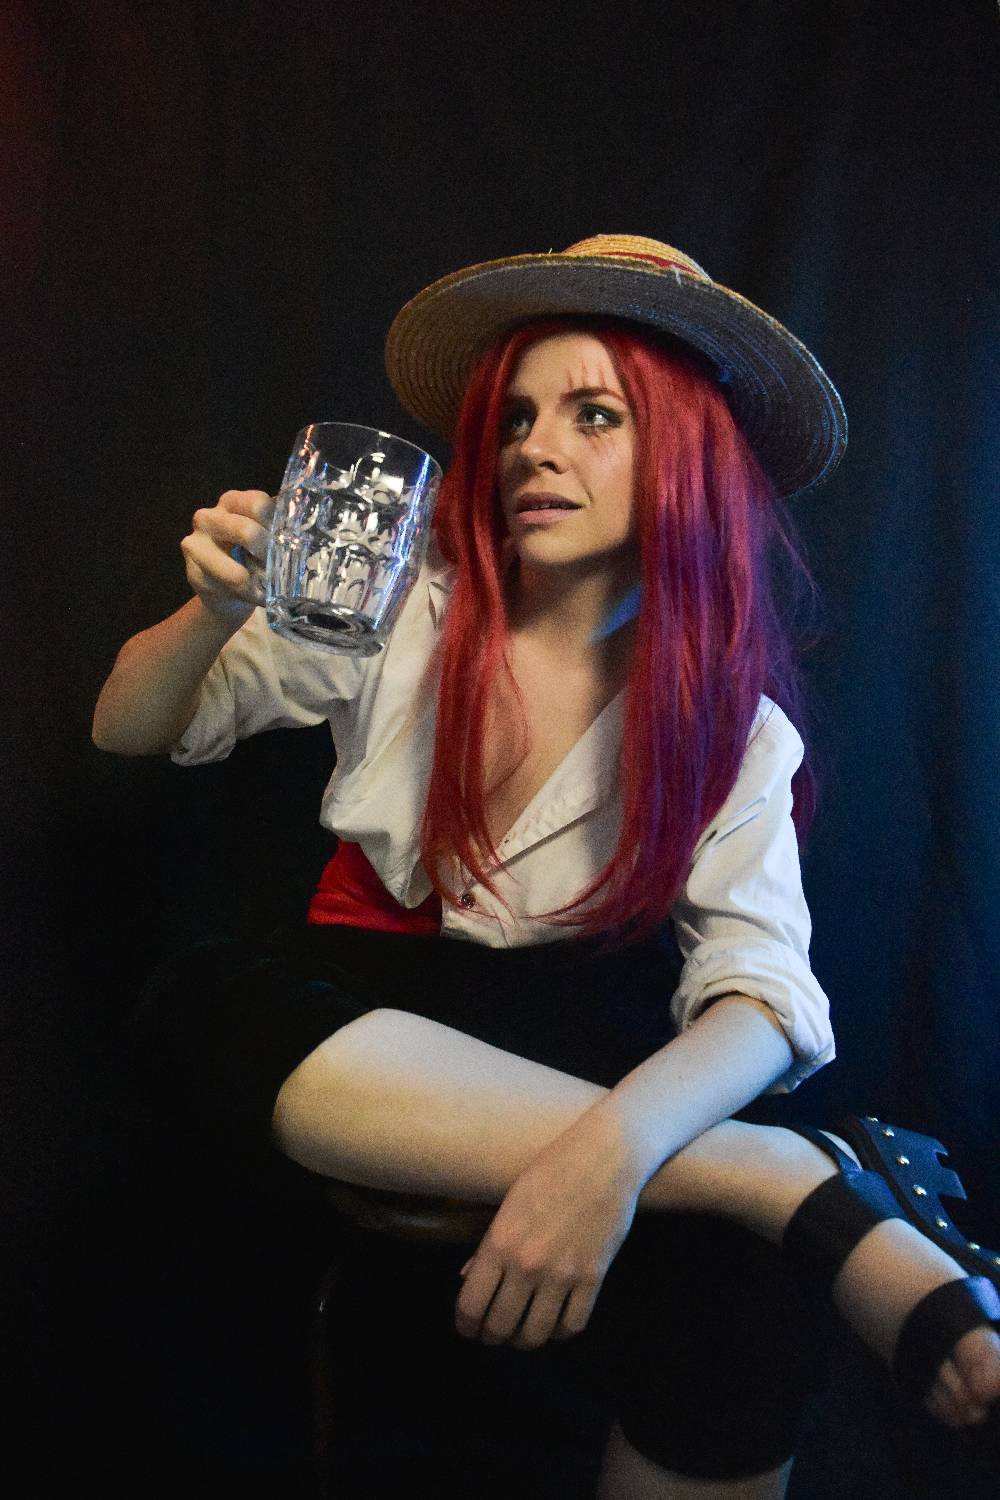 Cosplay One Piece Shank's Le Roux